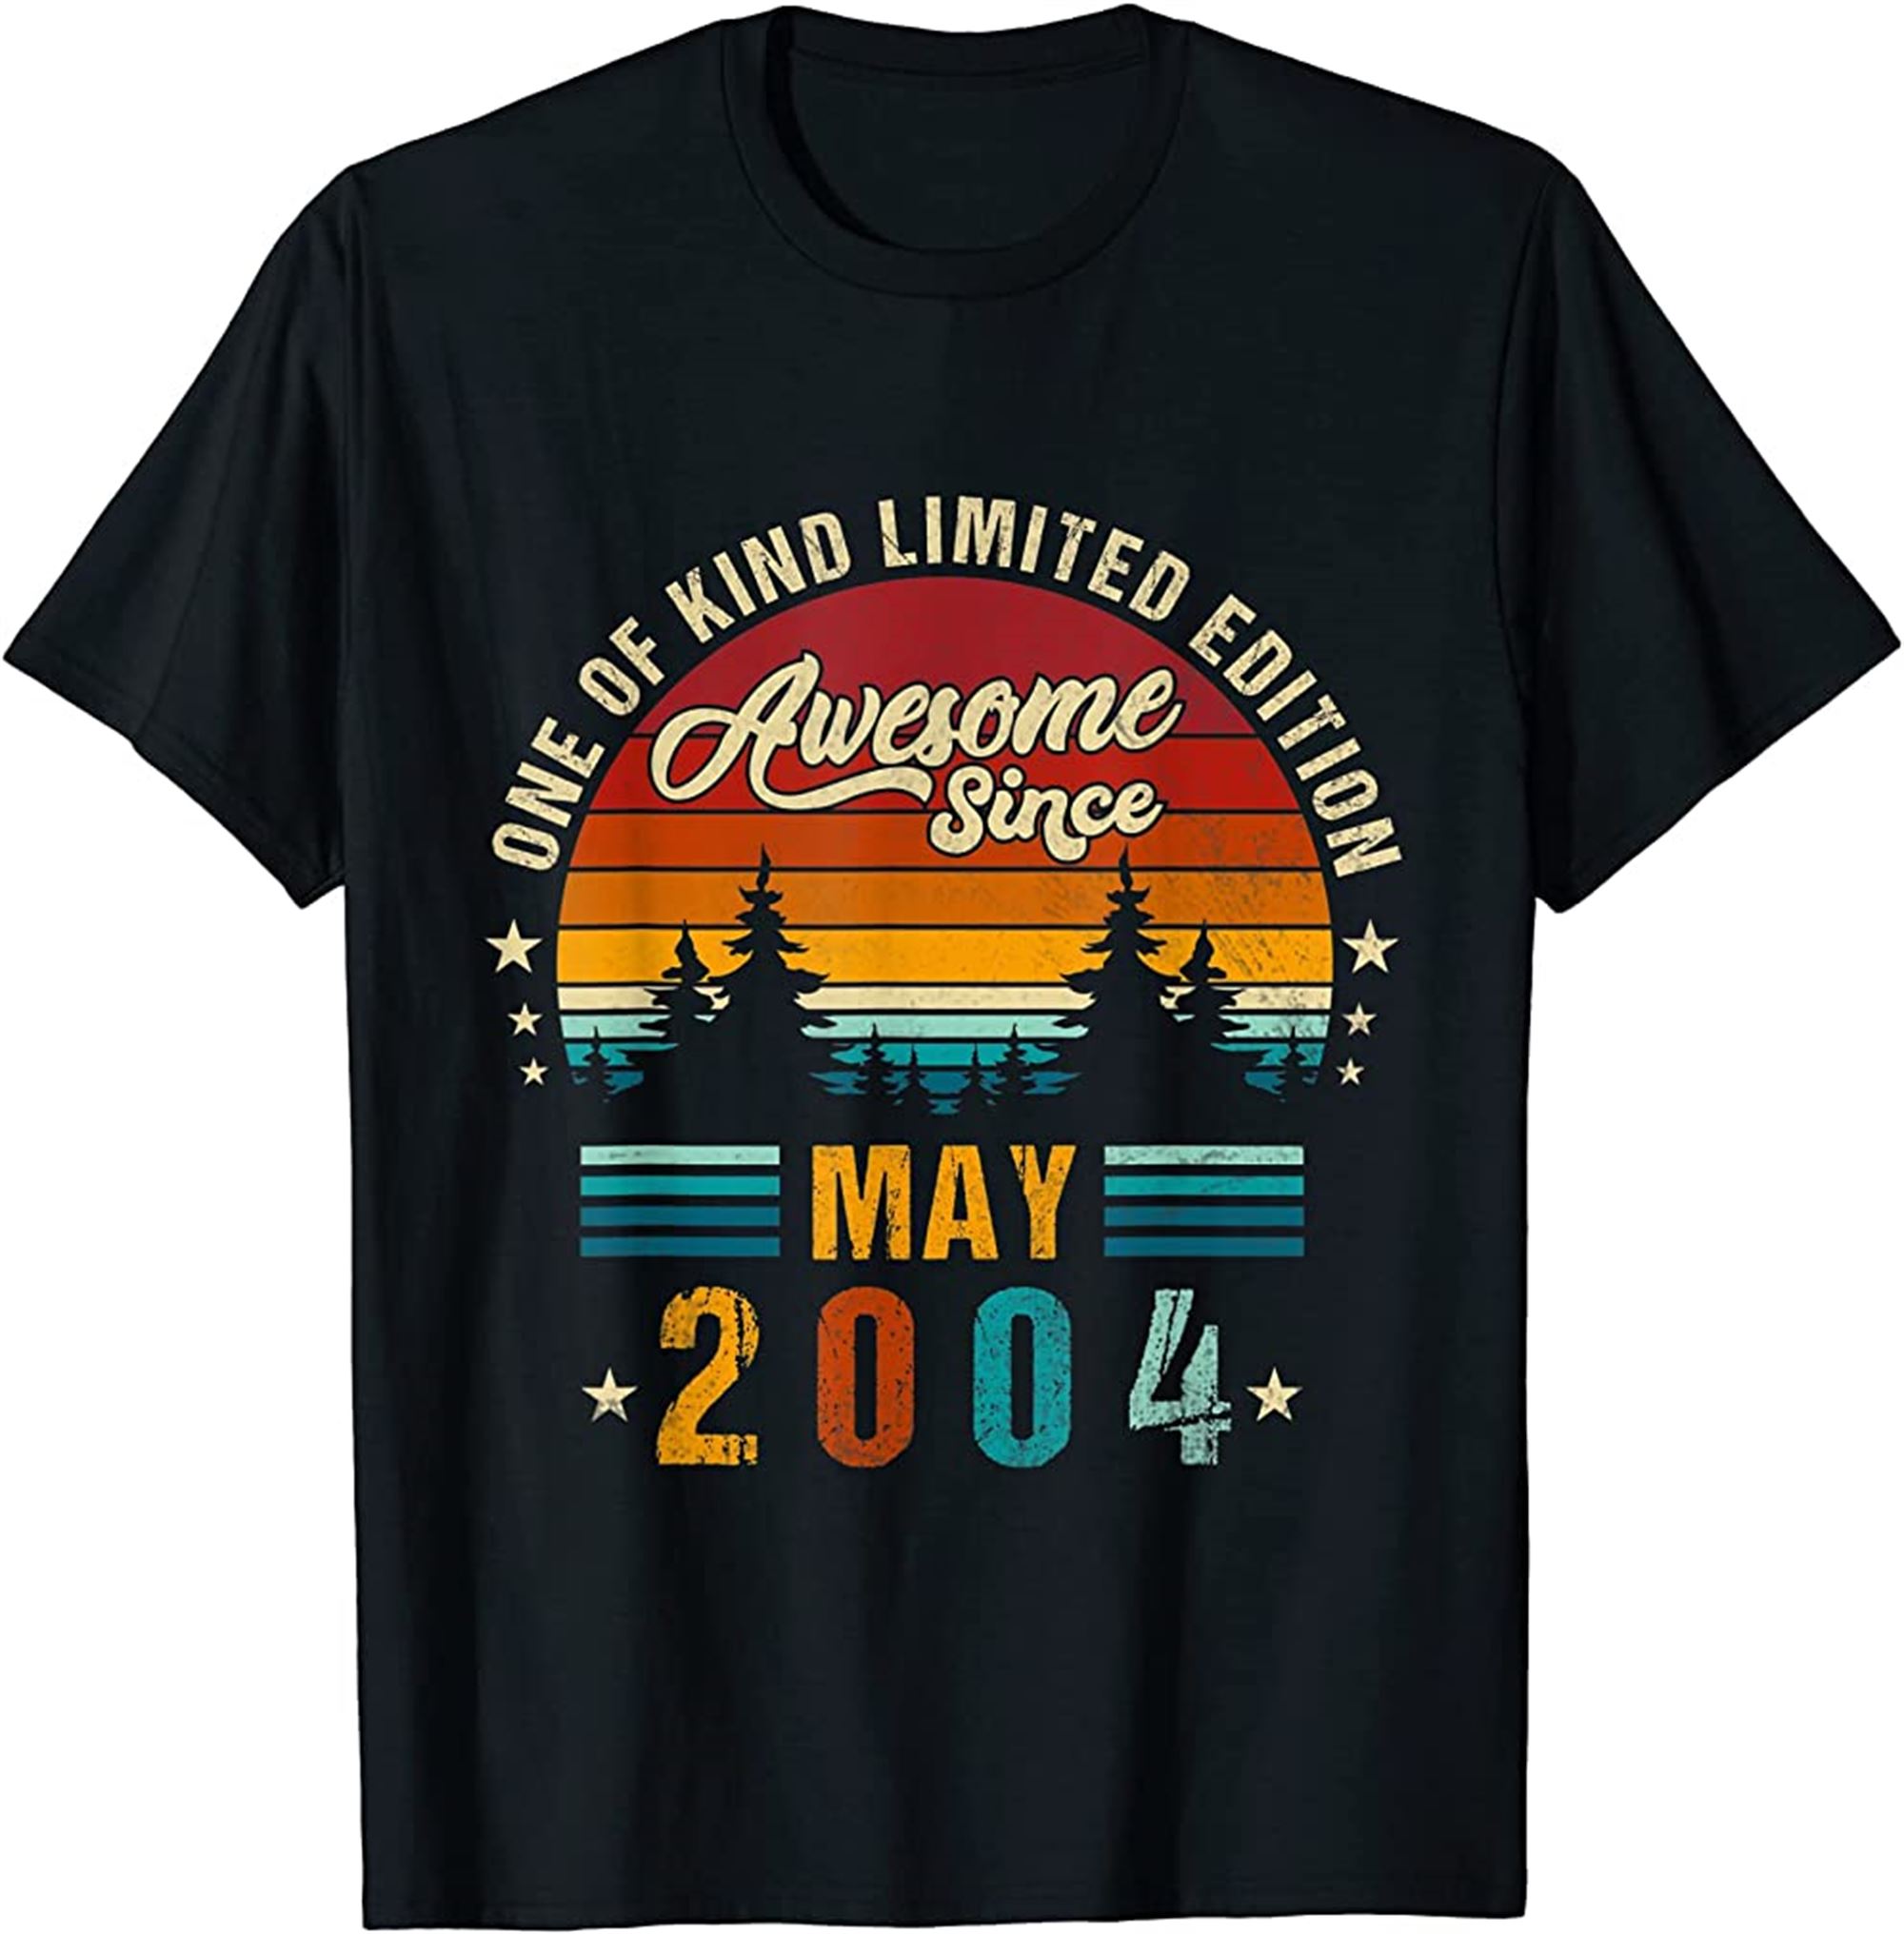 Vintage 18th Birthday Awesome Since May 2004 Epic Legend T-shirt Full Size Up To 5xl